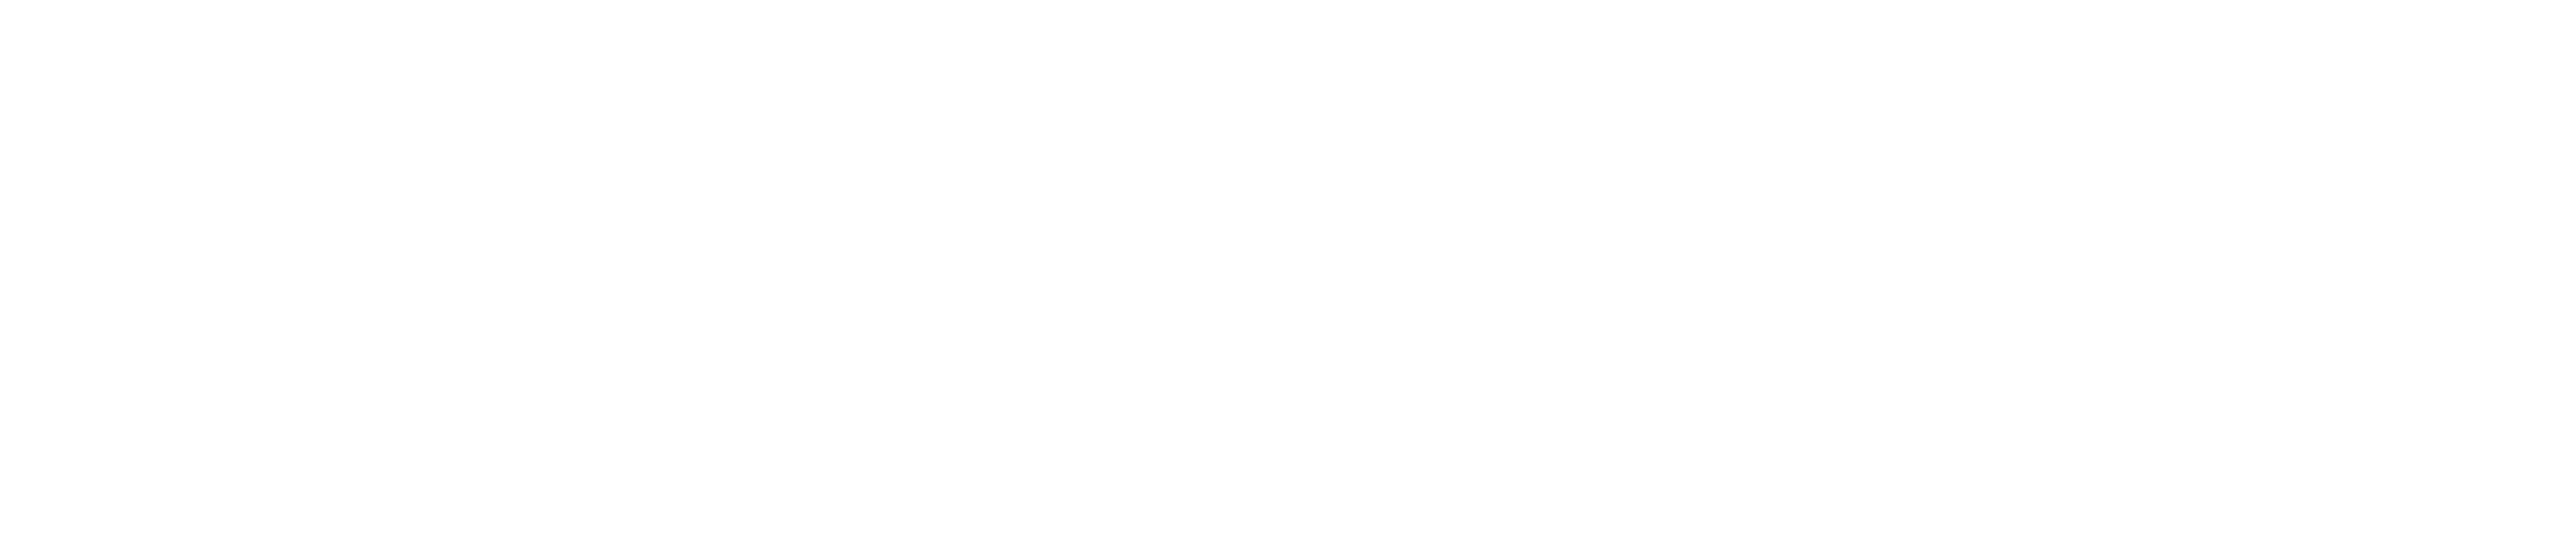 Japan Electric Power eXchange X Unwavering Support of Japan’s Electric Power Trade